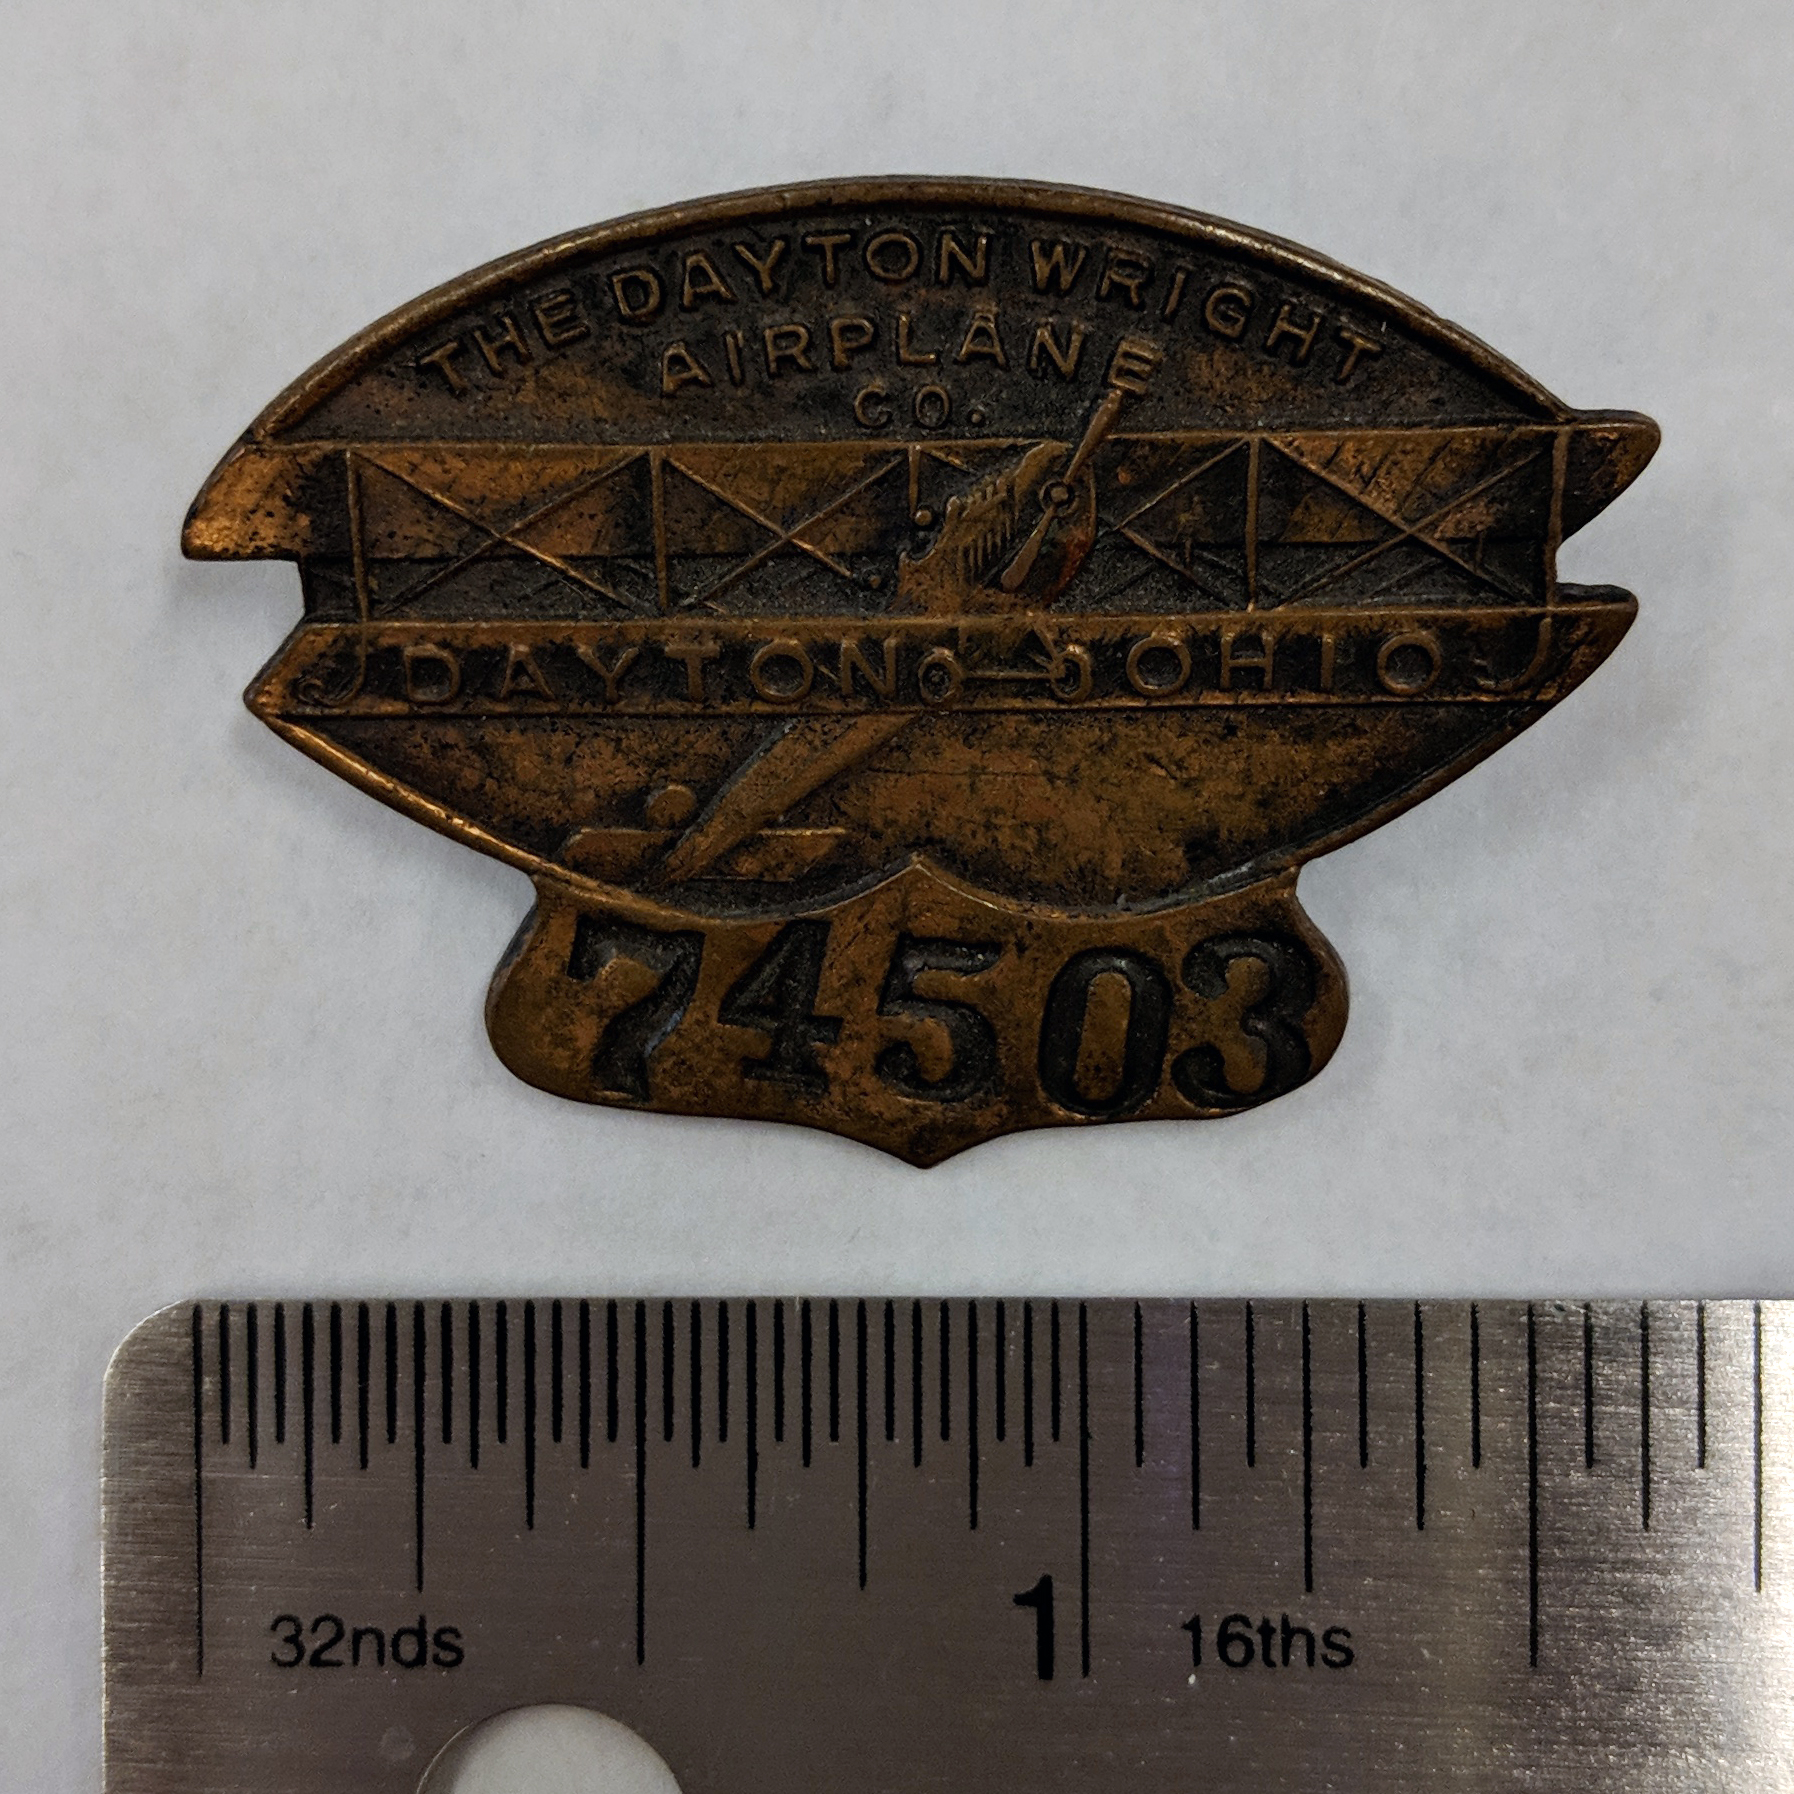 Dayton-Wright Airplane Company Employee Badge 74503 (from researcher's private collection)